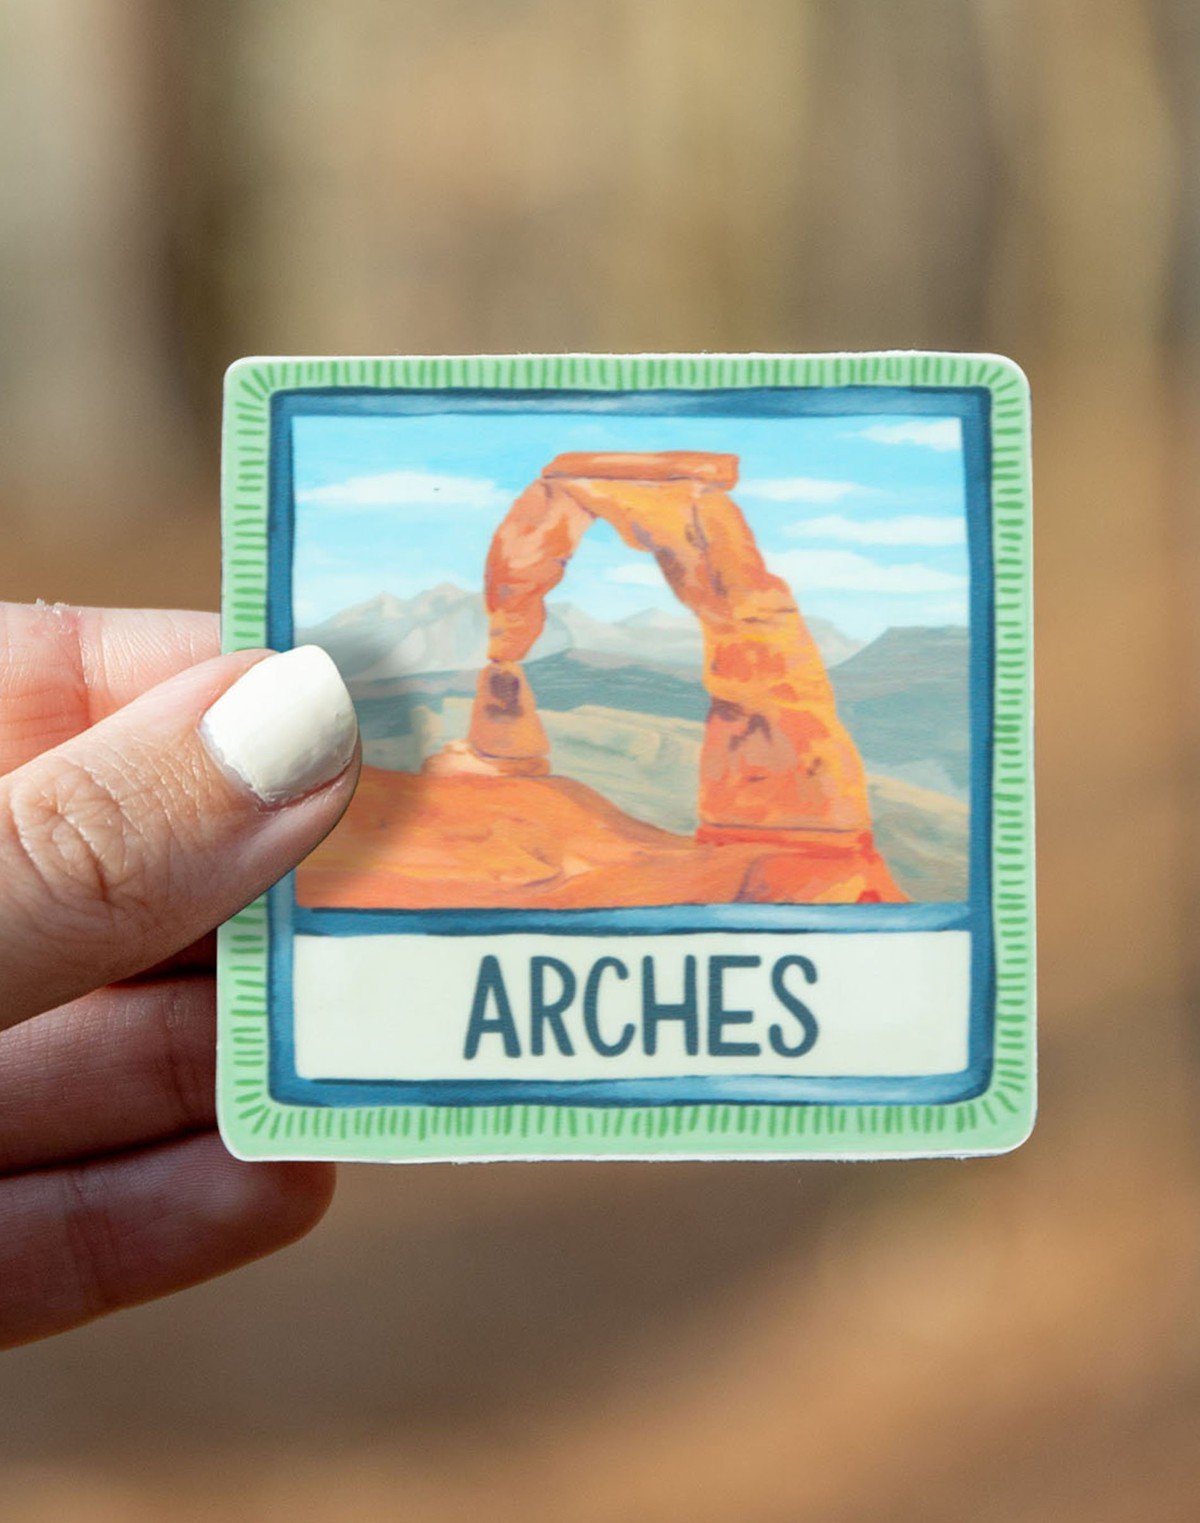 Arches Decal item